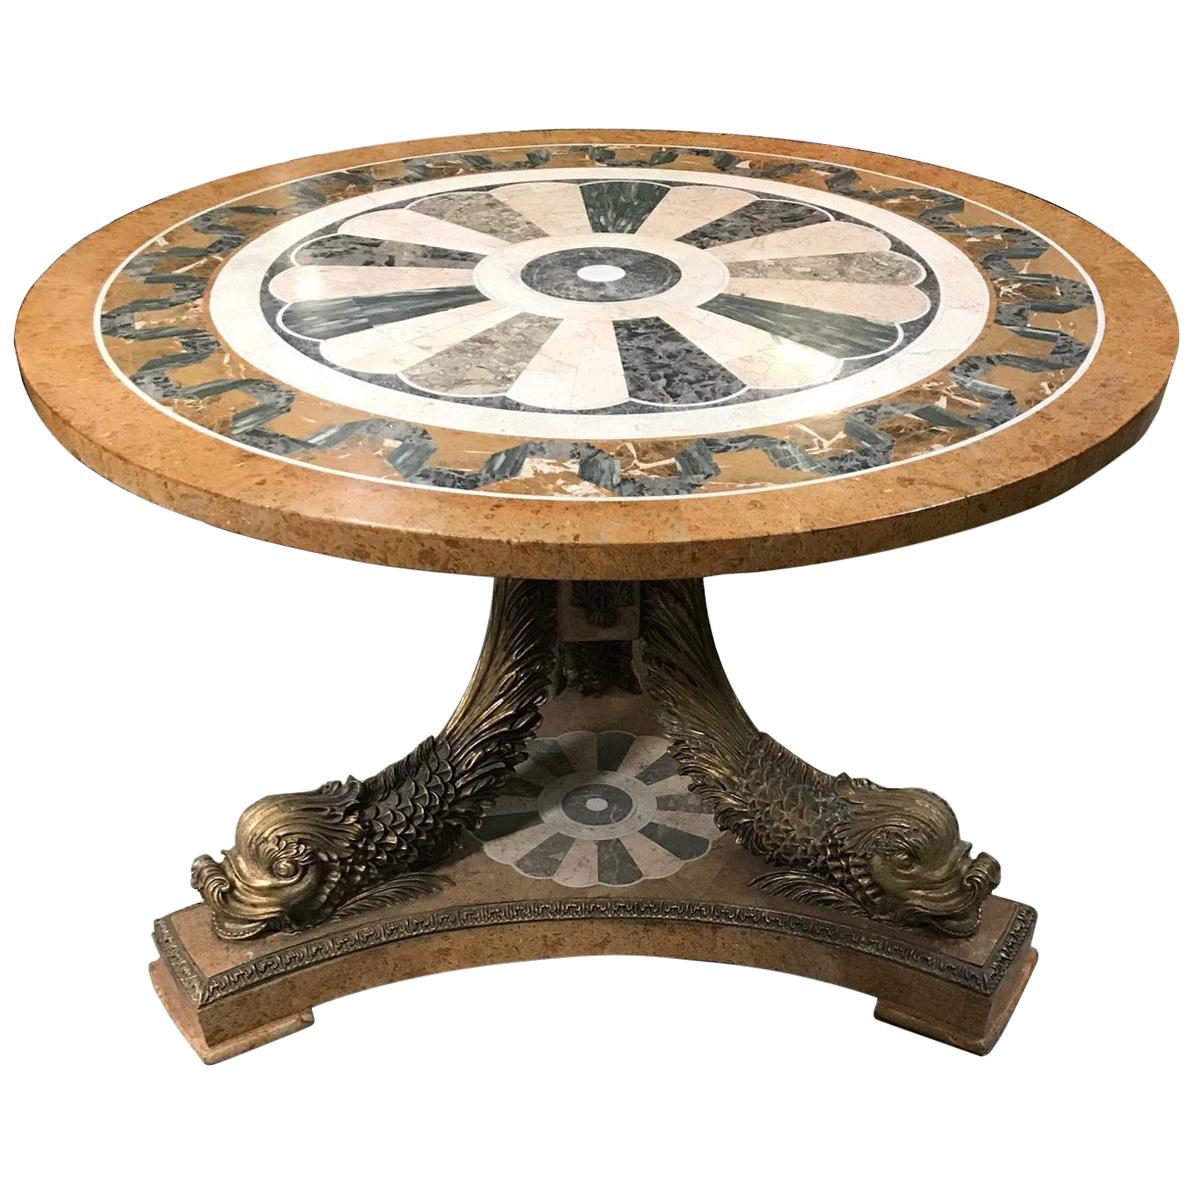 Round Pedestal Table with Dolphins